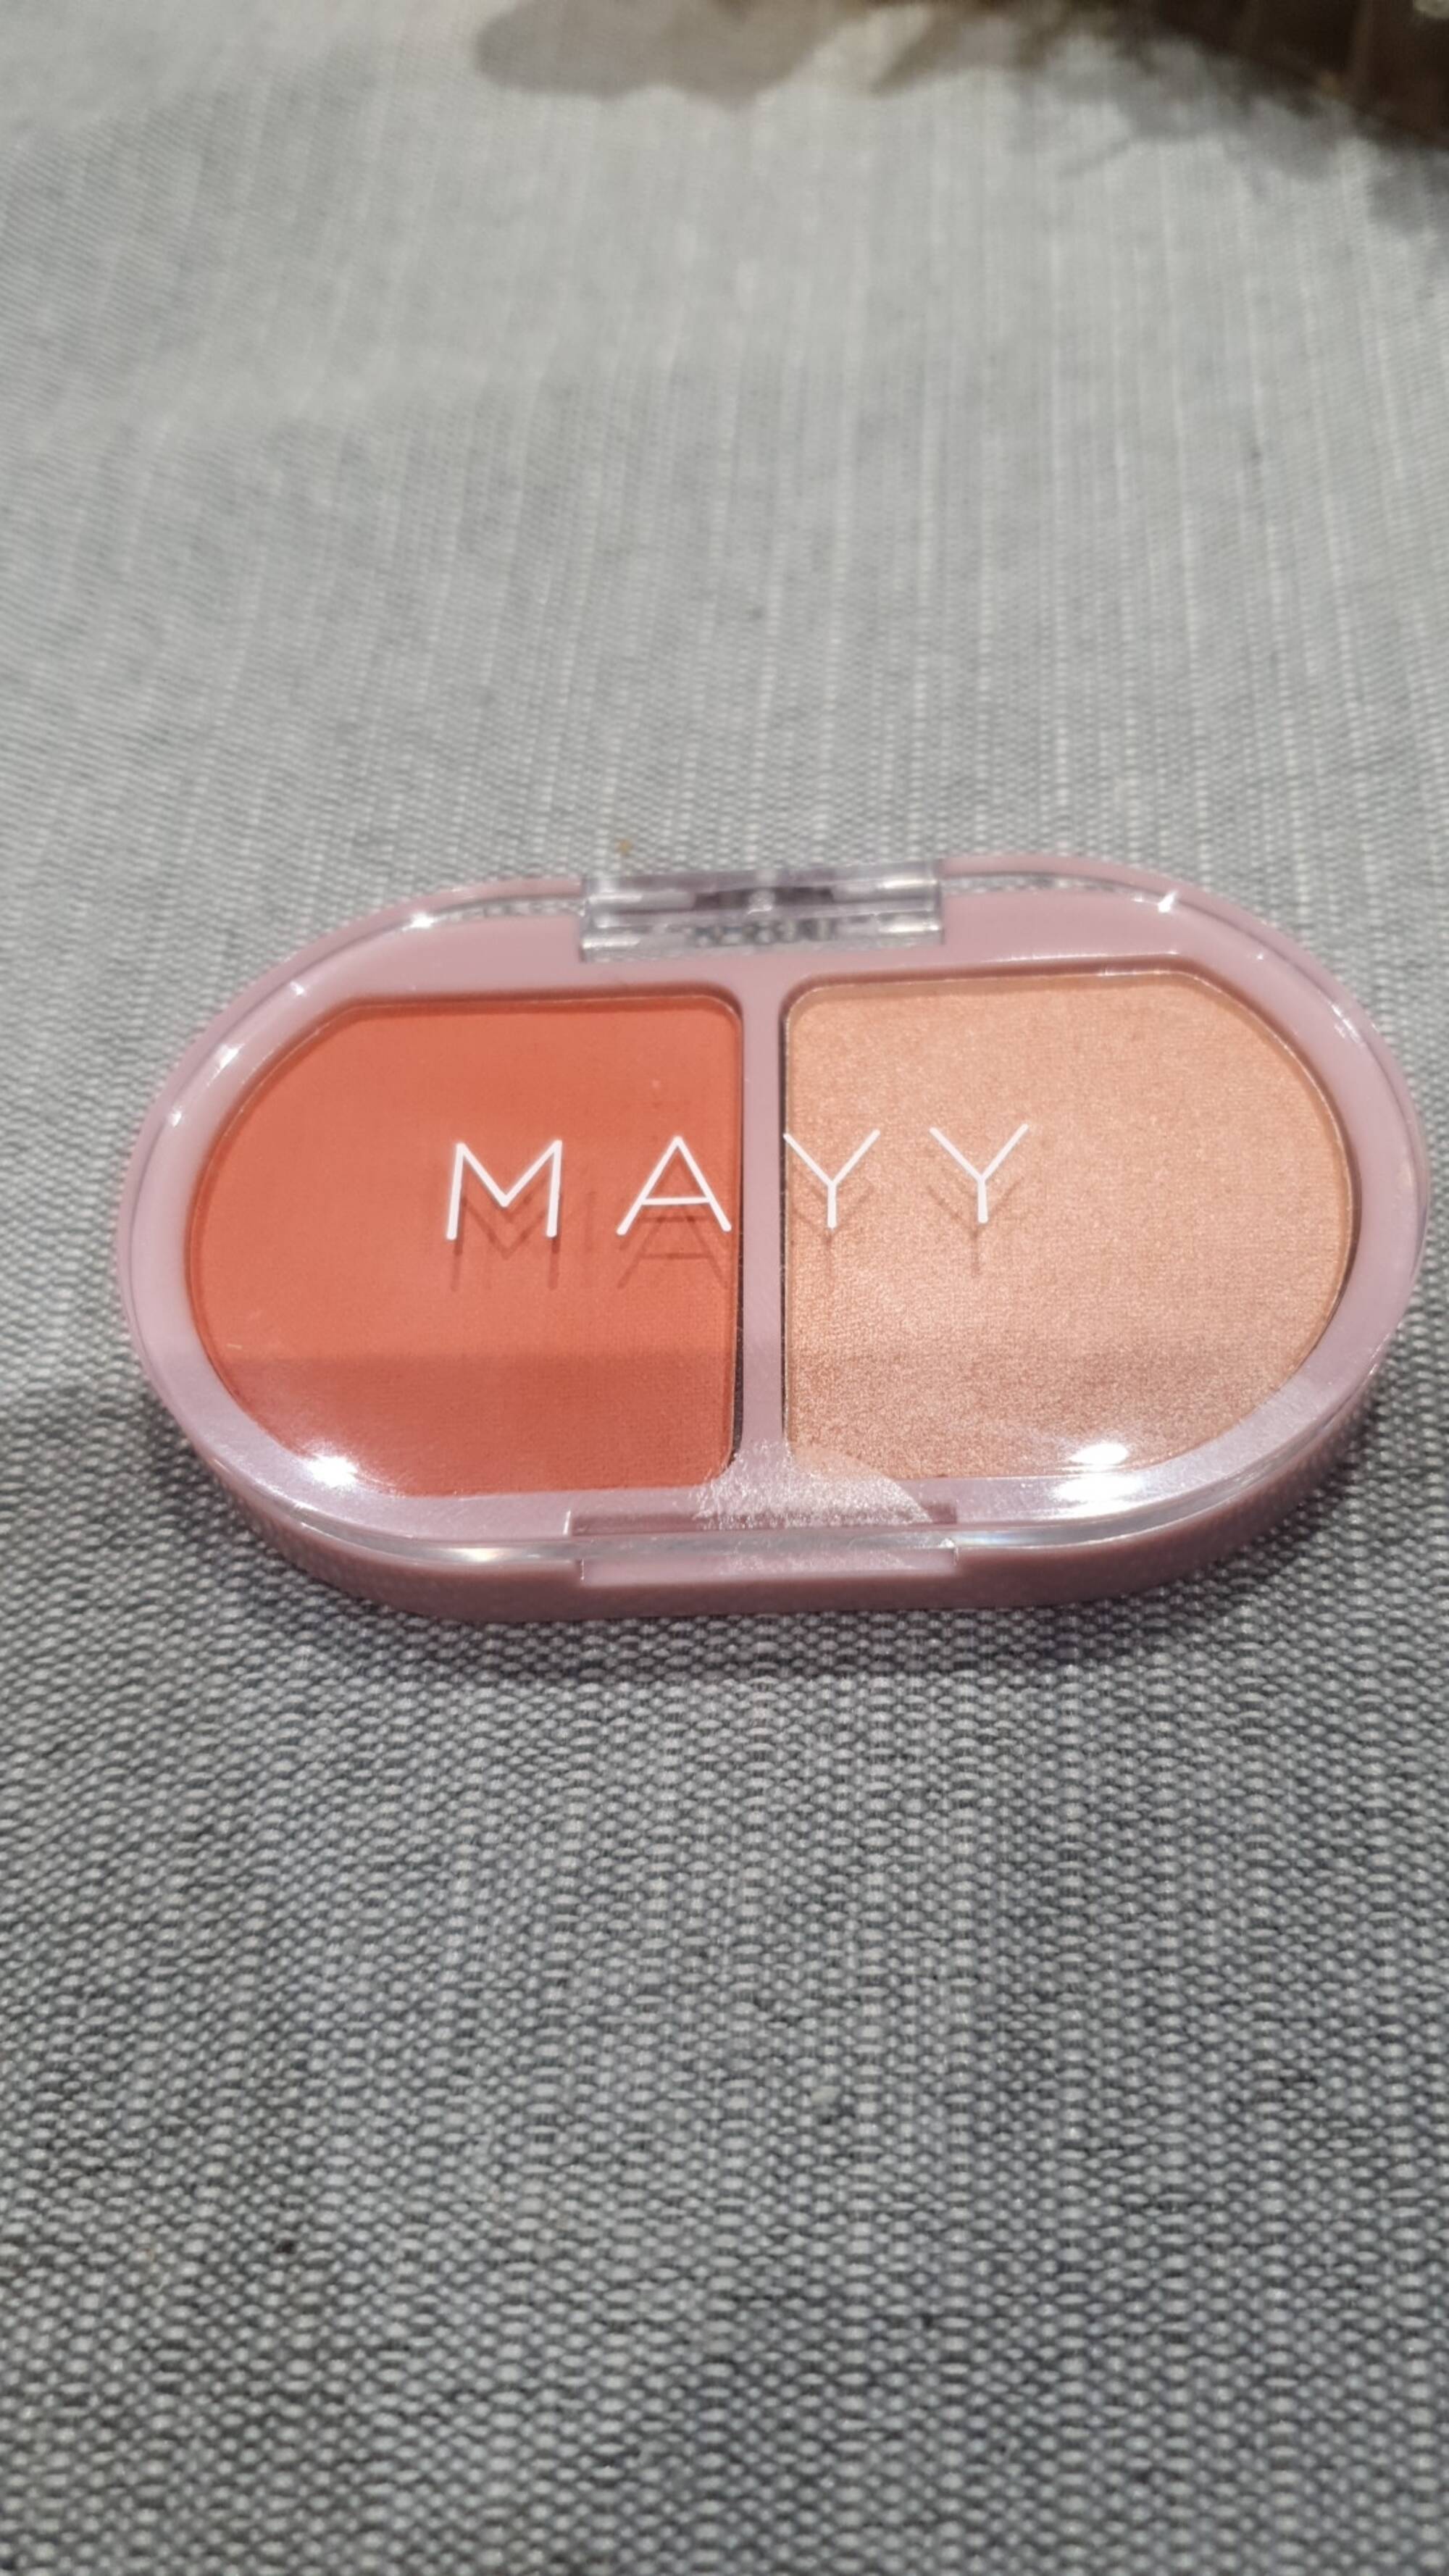 MAYY - Coral blusher & sunkissed highlighter